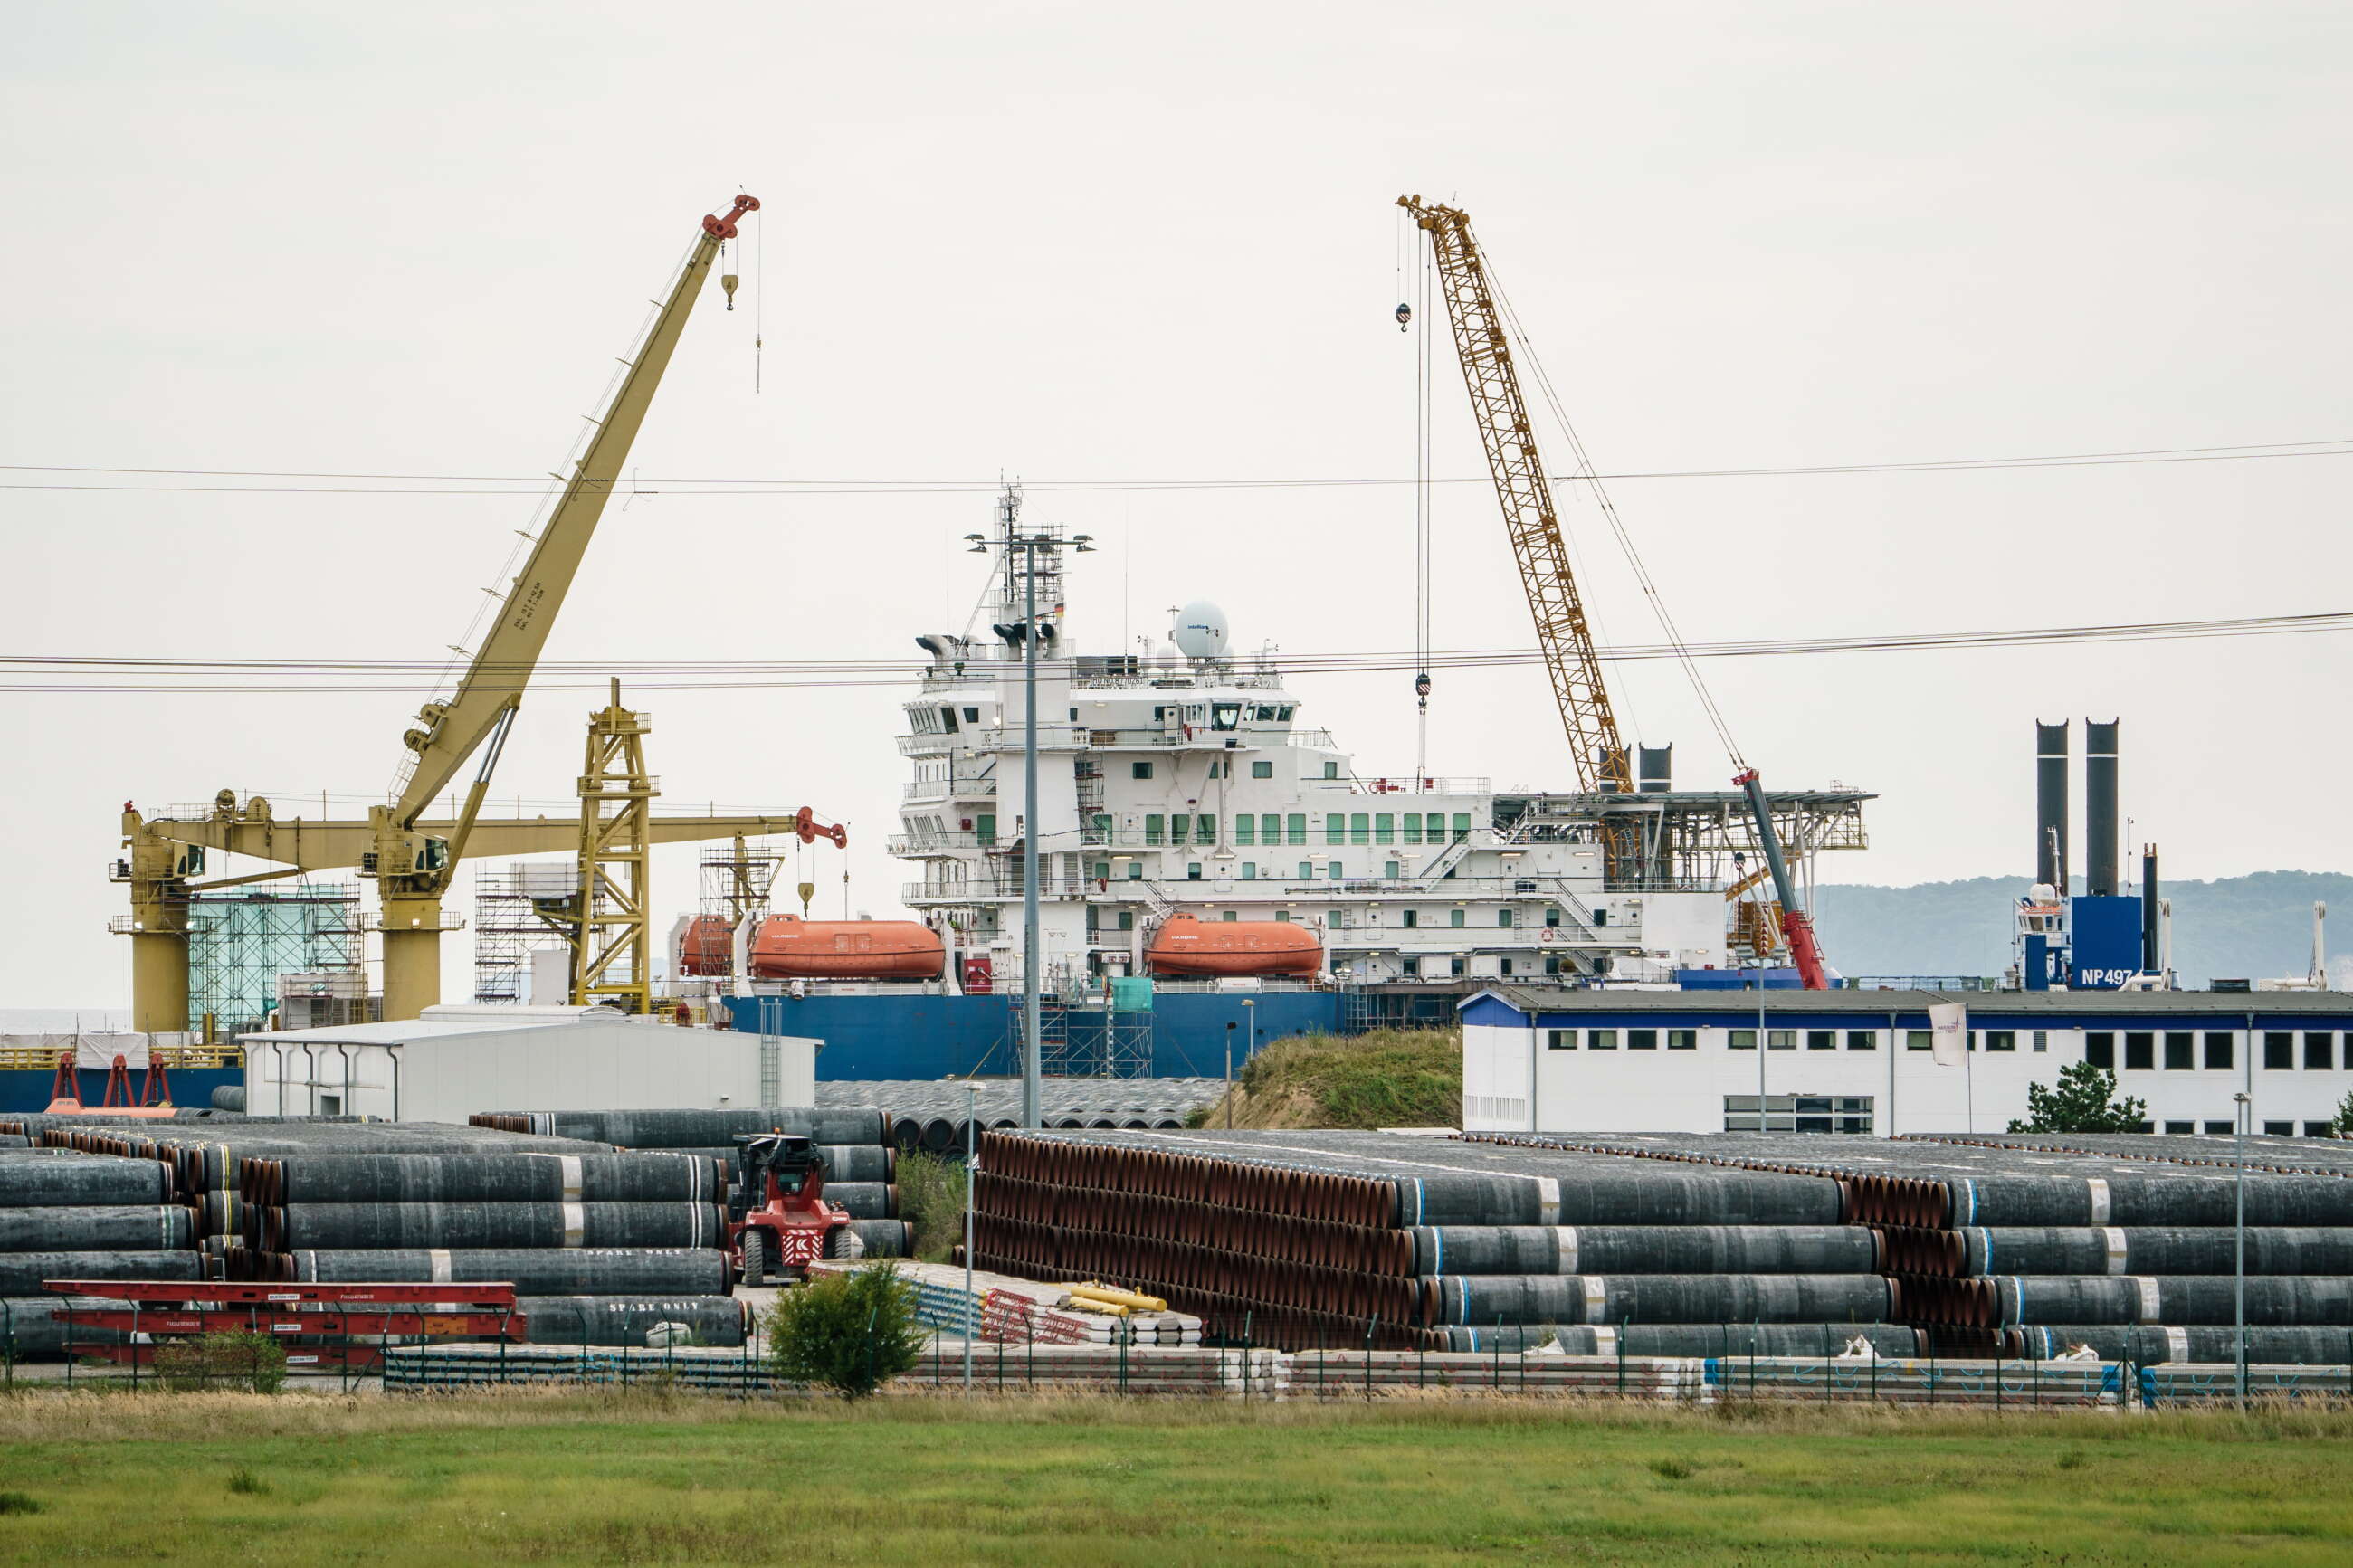 Sassnitz (Germany), 11/09/2020.- Pipes for the construction of the German-Russian gas pipeline project Nord Stream 2 are piled up in front of the Russian pipe layer vessel 'ÄòAkademik Tscherski'Äô at Mukran port in Sassnitz, Germany, 11 September 2020. Opposition parties have called on German Chancellor Merkel to abandon the joint German-Russian pipeline project Nord Stream 2 in response to the alleged poisoning of Kreml critic Navalny. (Alemania, Rusia) EFE/EPA/CLEMENS BILAN